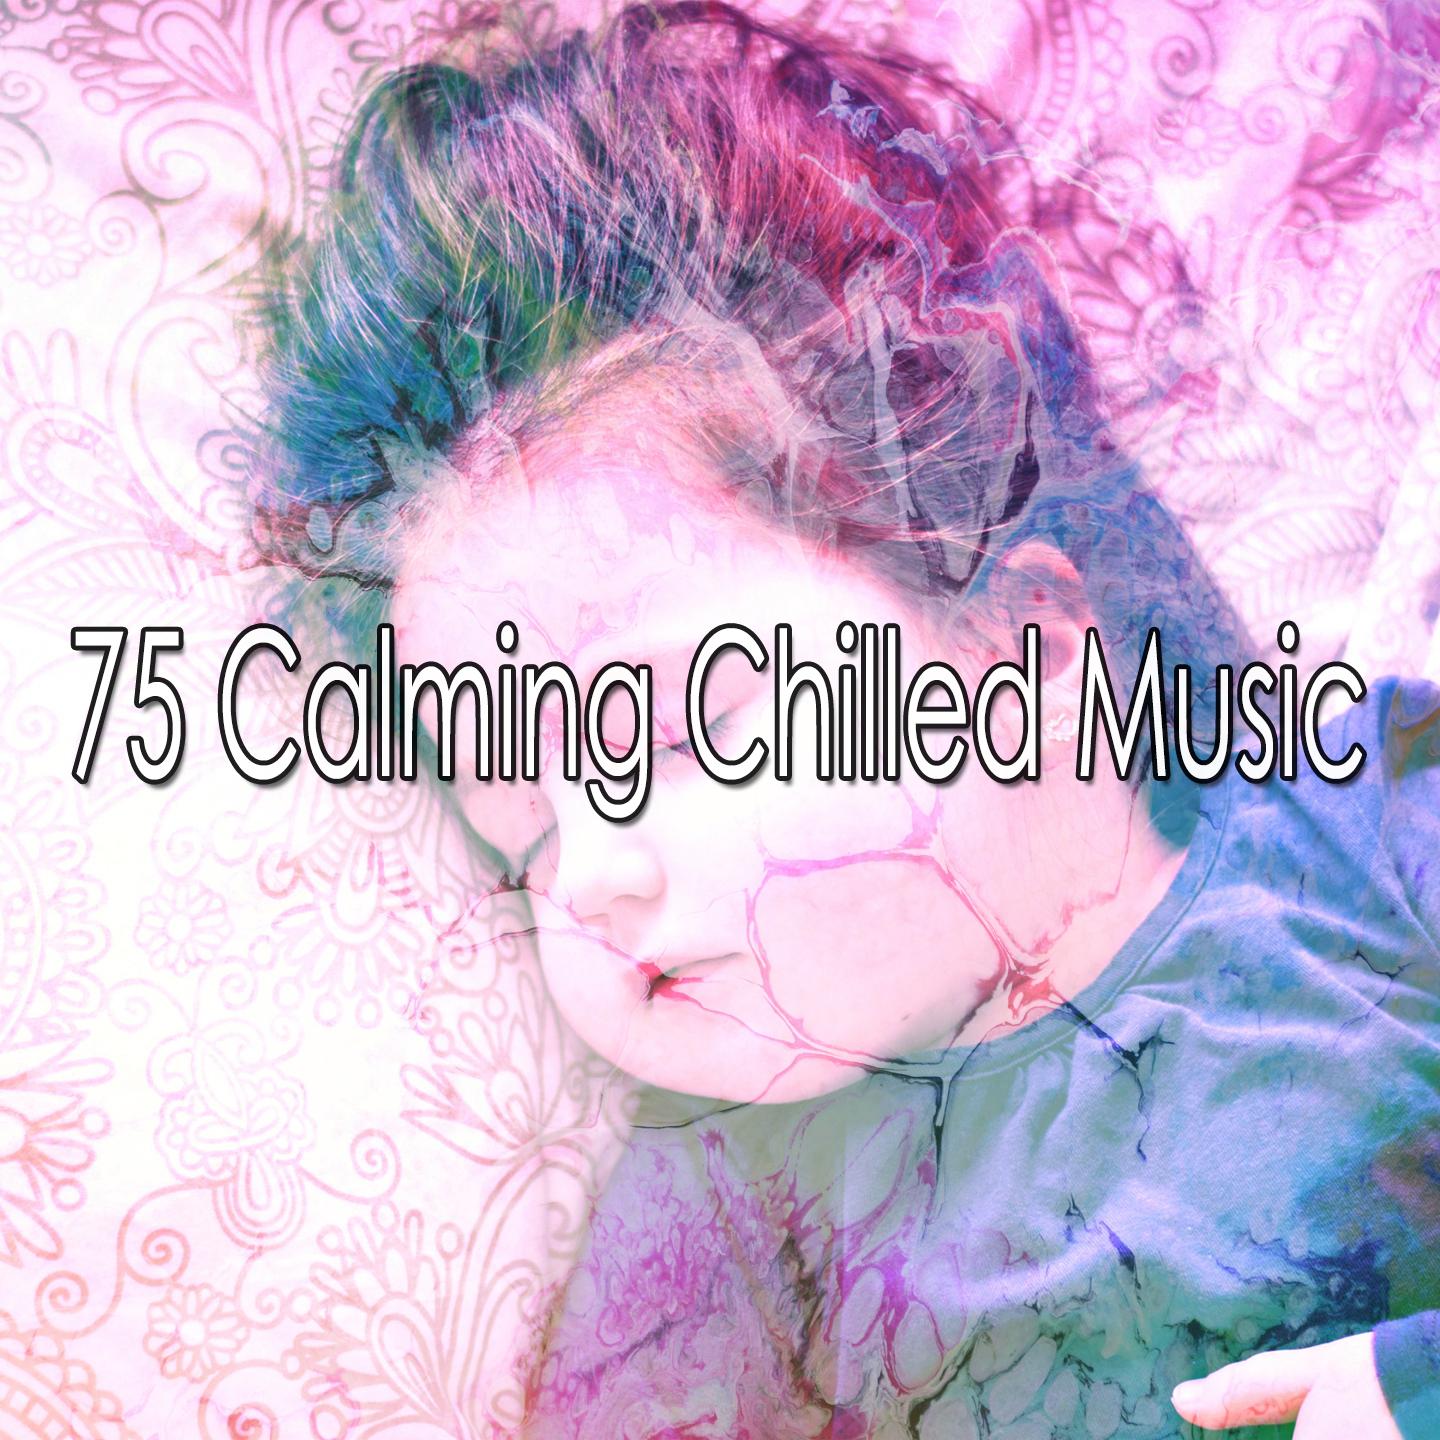 75 Calming Chilled Music